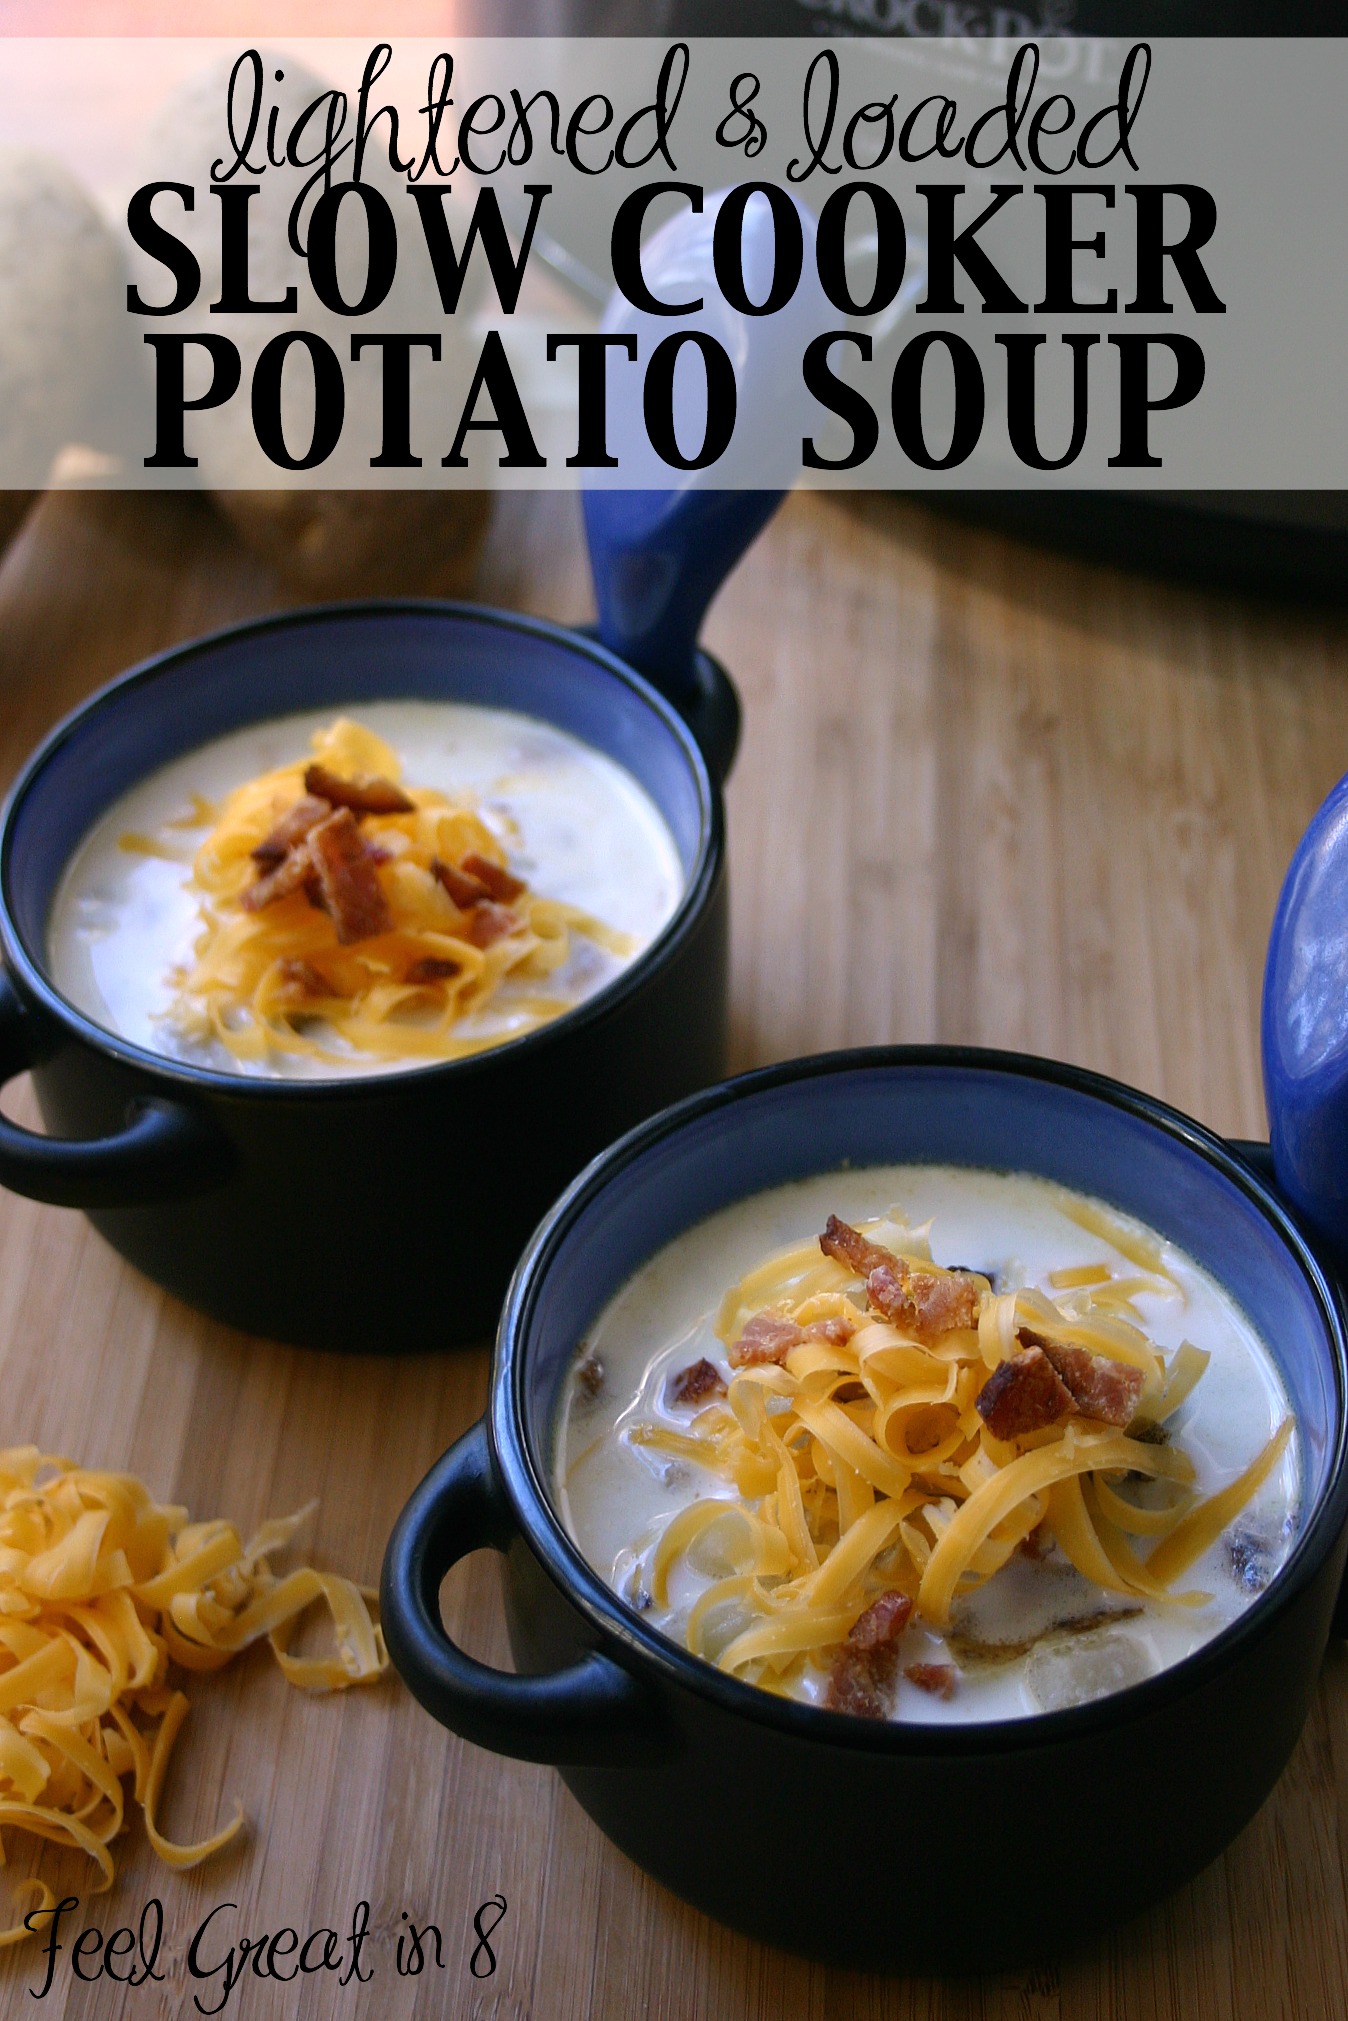 Lightened & Loaded Slow Cooker Potato Soup - This soup is the best! Loaded with baked potato fixings, but low in calories and made with only real food ingredients! | Feel Great in 8 #healthy #recipe #slowcooker #soup